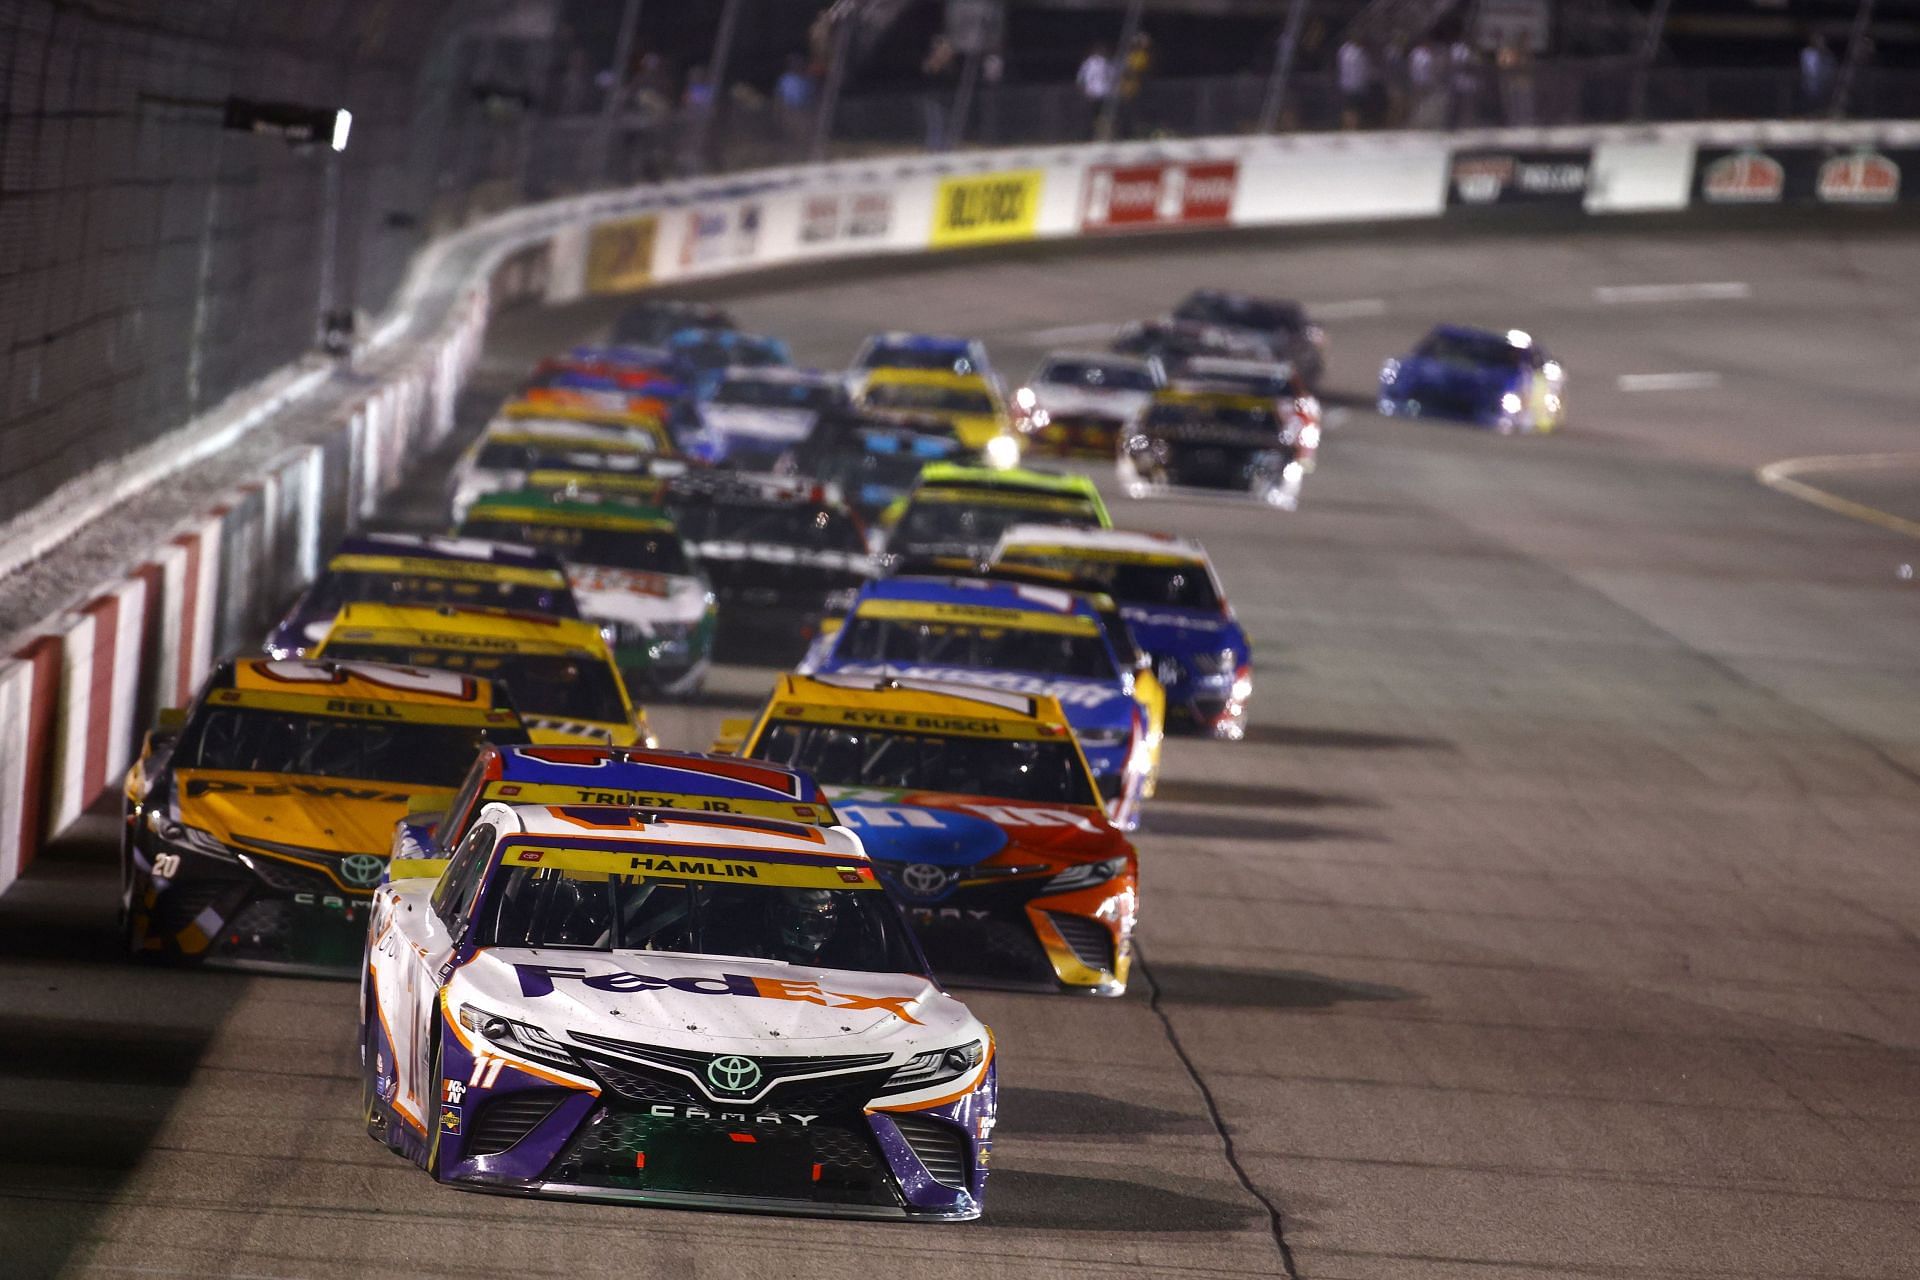 Denny Hamlin leads during the NASCAR Cup Series Federated Auto Parts 400 Salute to First Responders at Richmond Raceway in 2021. (Photo by Jared C. Tilton/Getty Images)